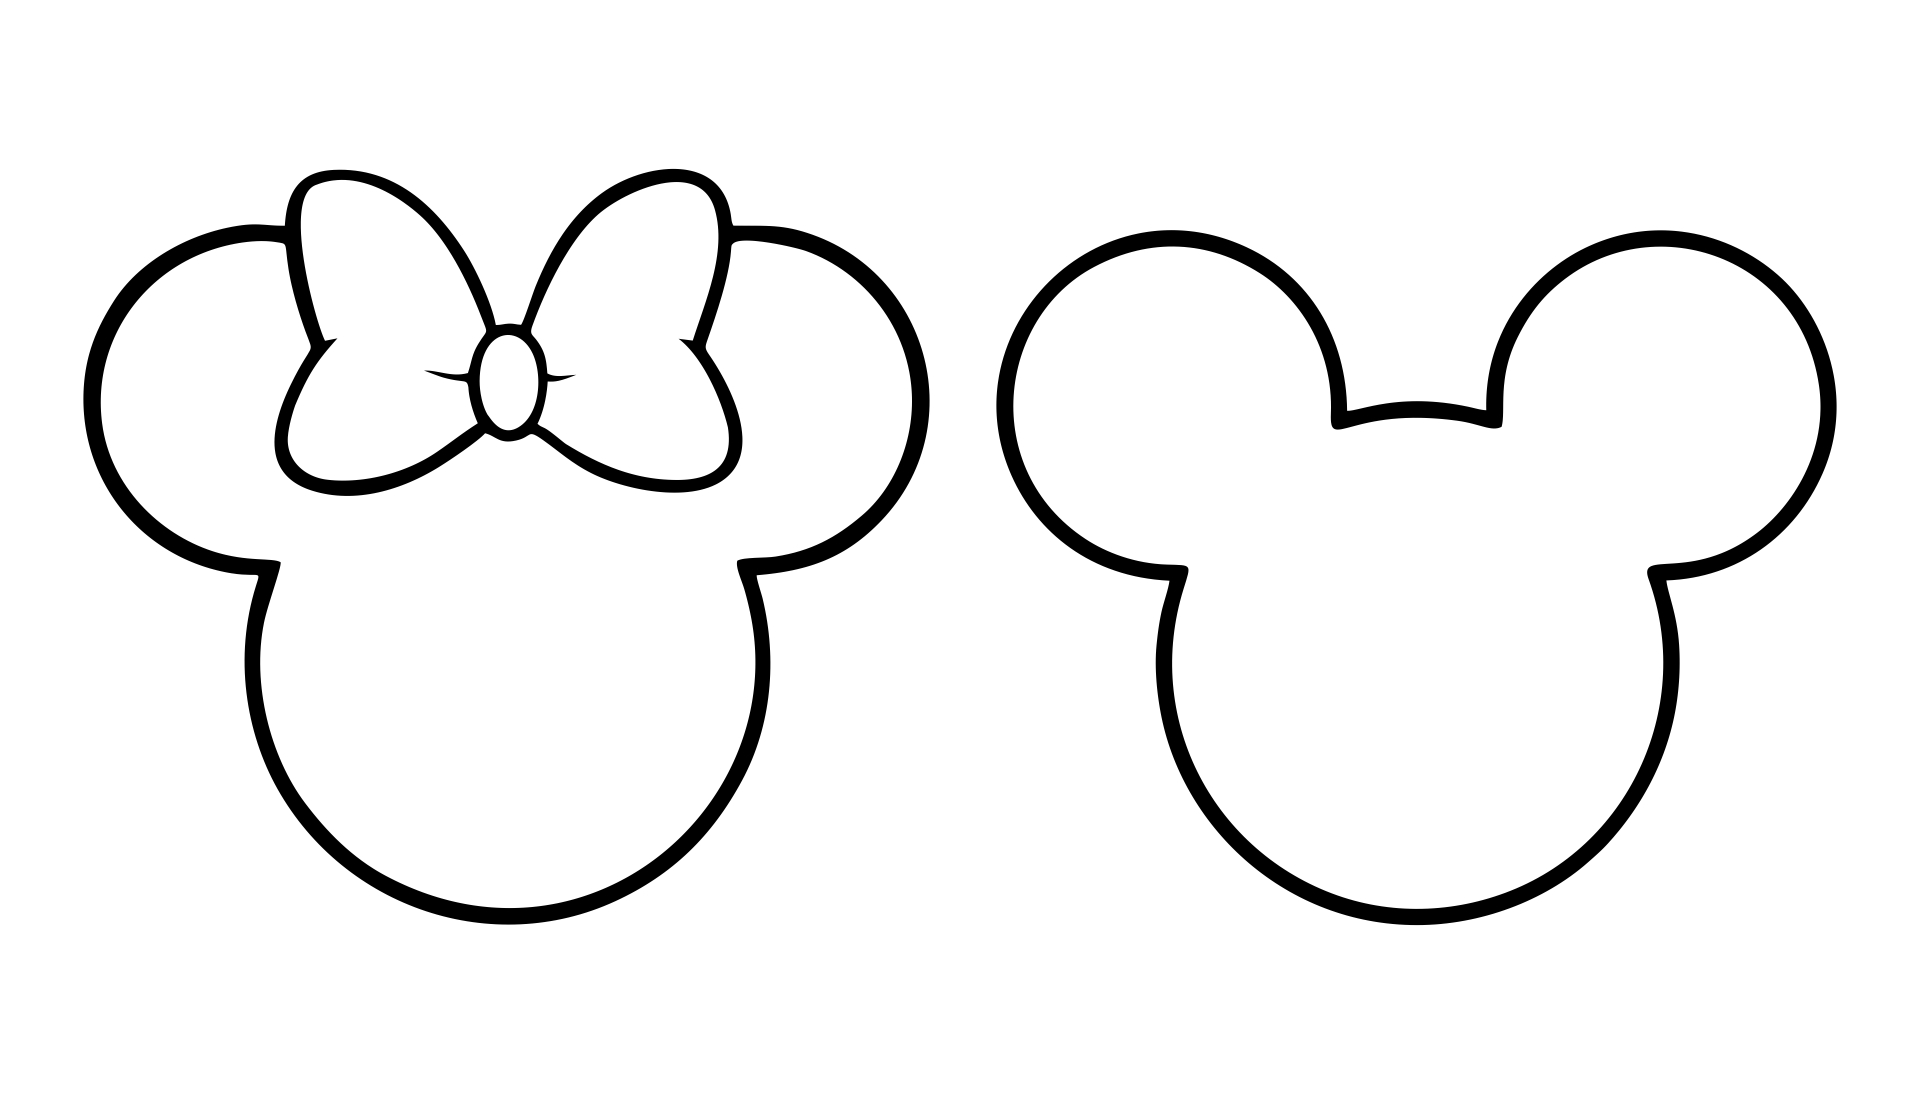 6-best-images-of-minnie-mouse-stencil-printable-minnie-mouse-pumpkin